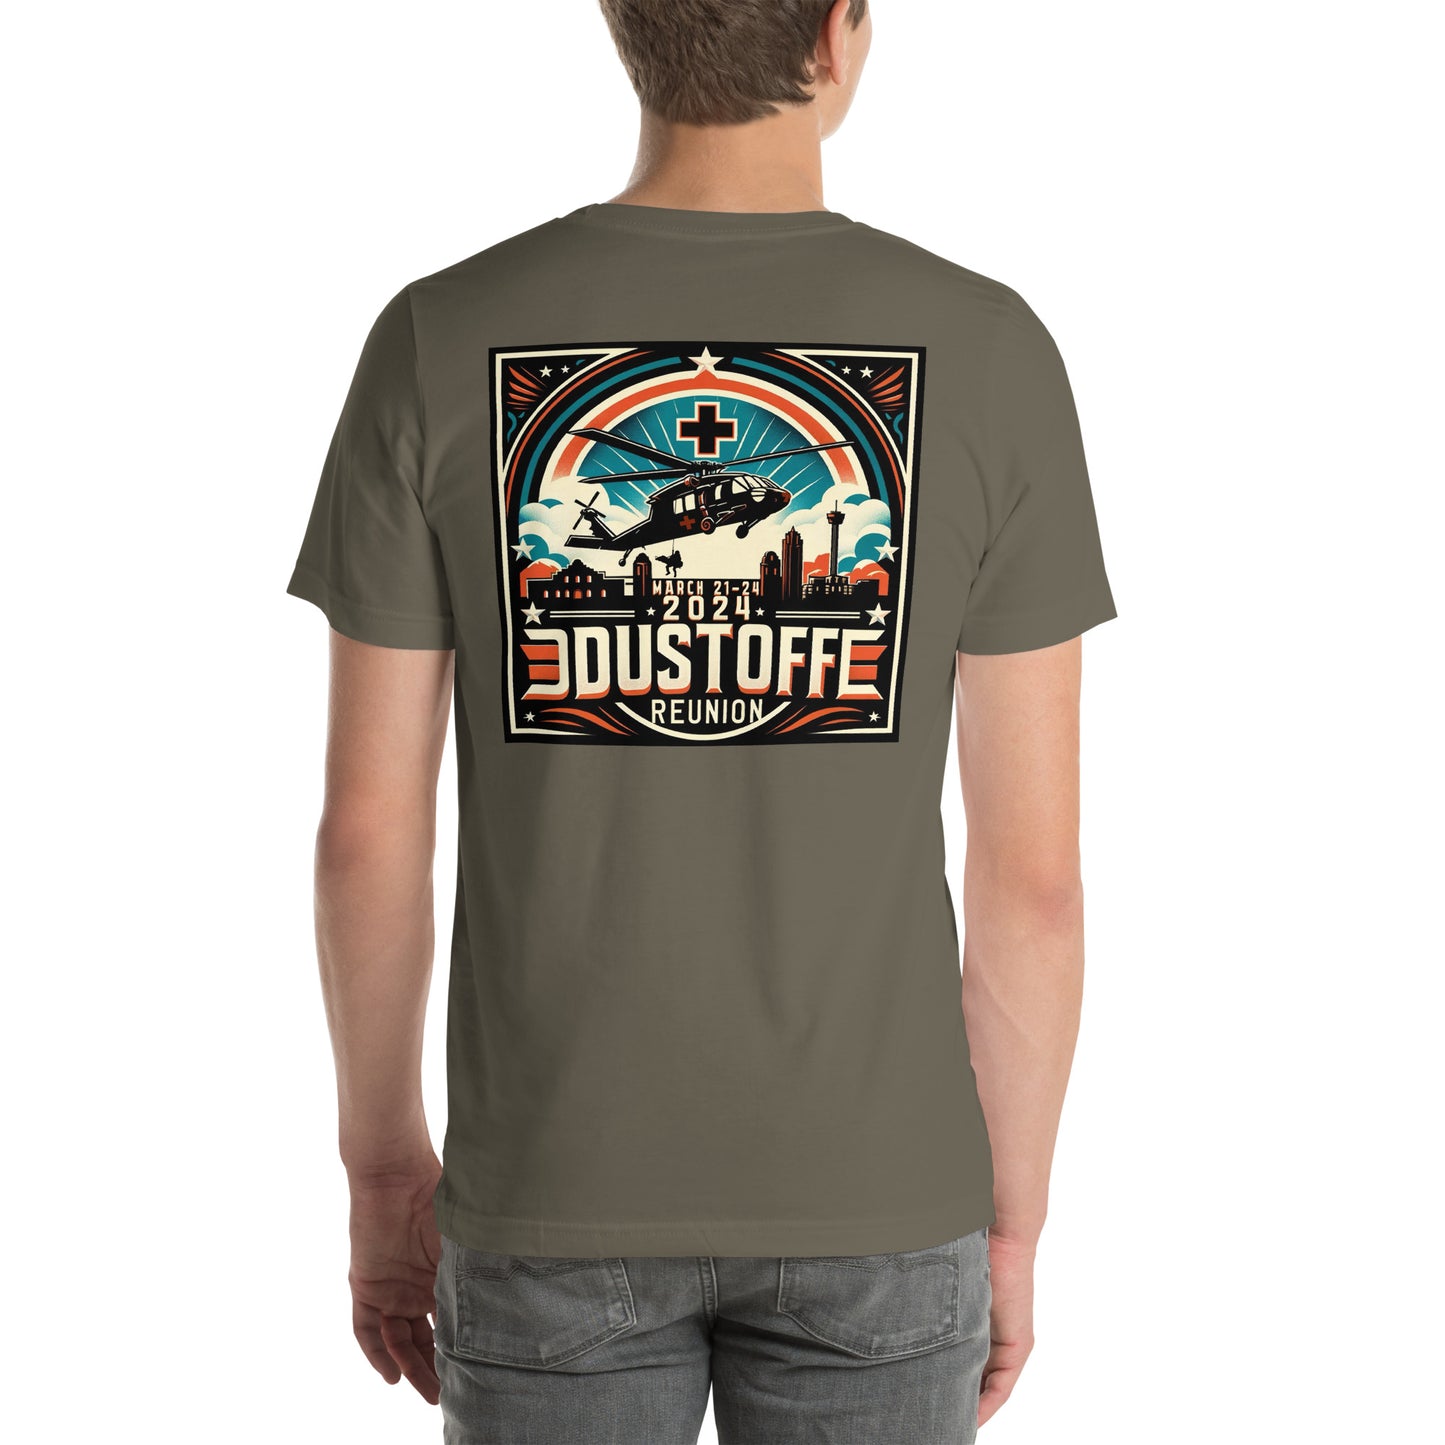 JP8 and Coffee DUSTOFF Reunion 2024 t-shirt